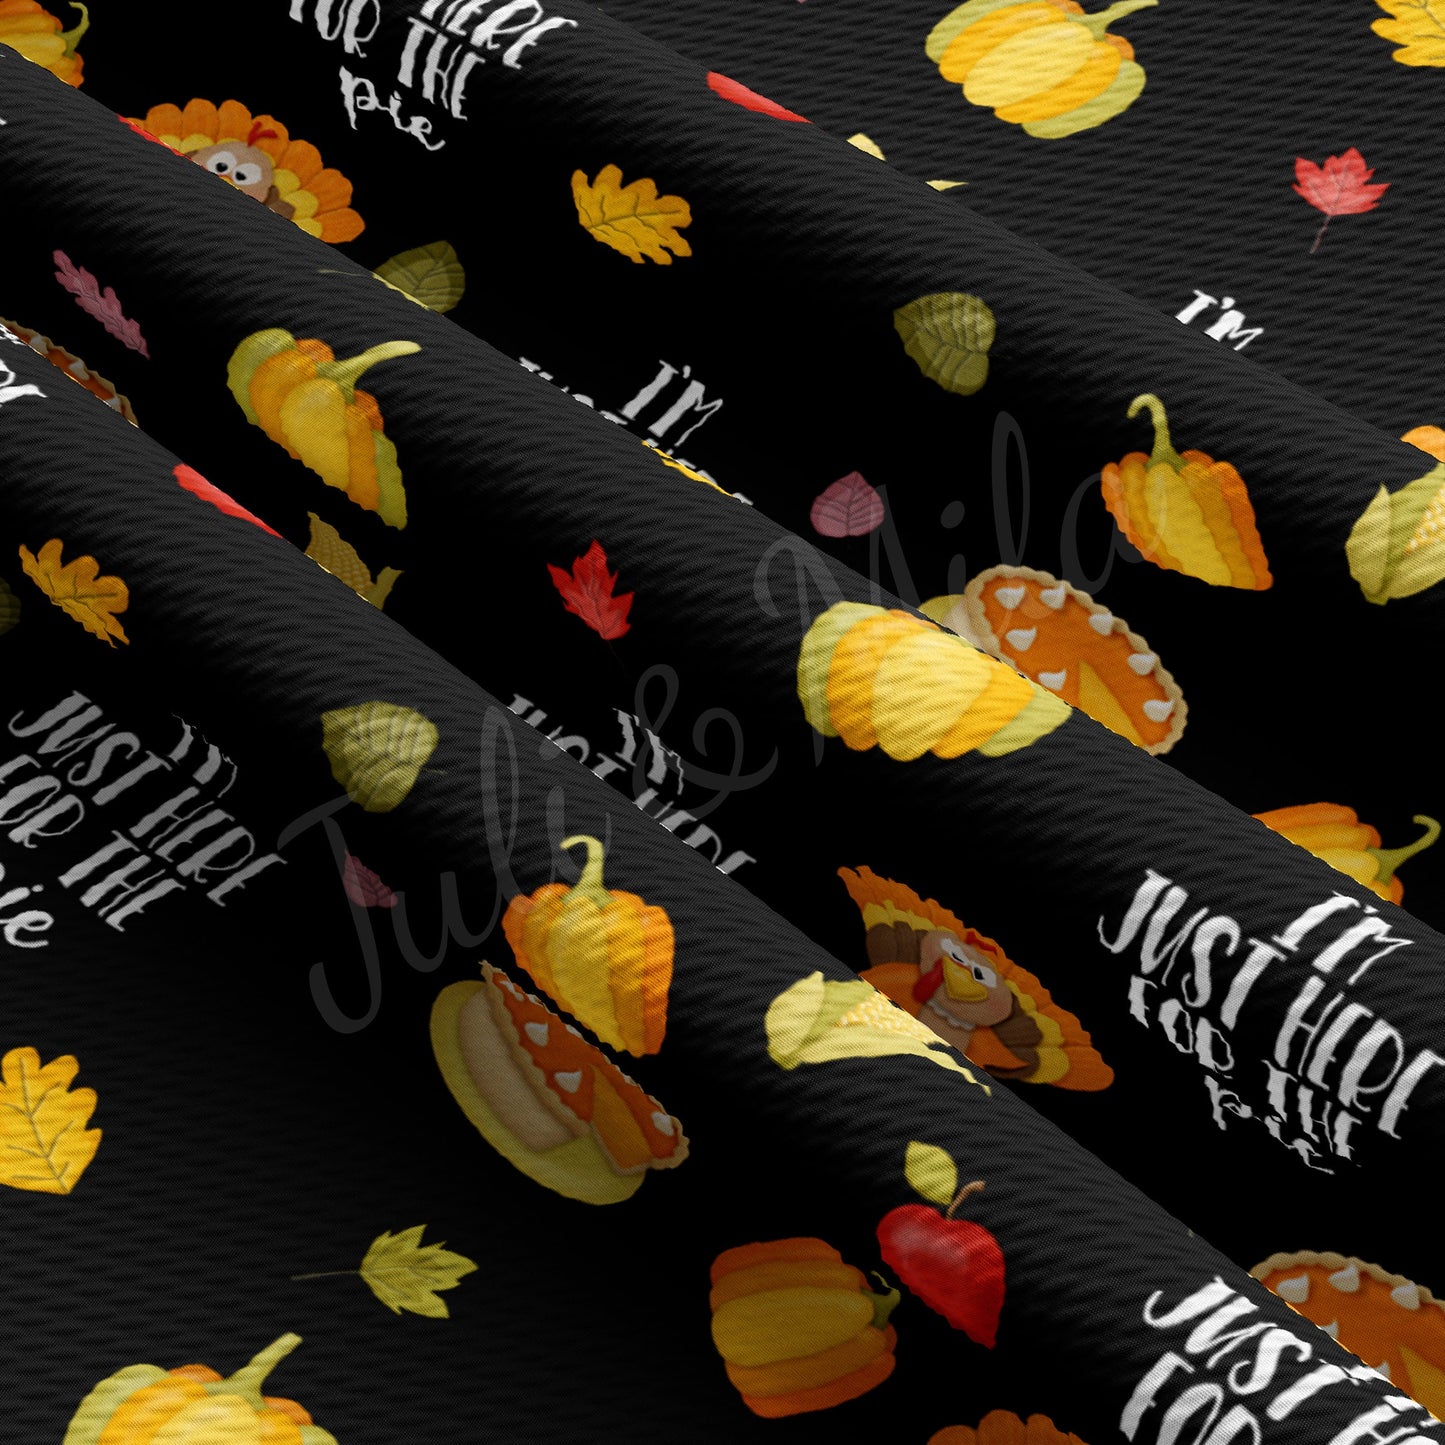 Thanksgiving Printed Liverpool Bullet Textured Fabric by the yard 4Way Stretch Solid Strip Thick Knit Jersey Liverpool Fabric pumpkin200